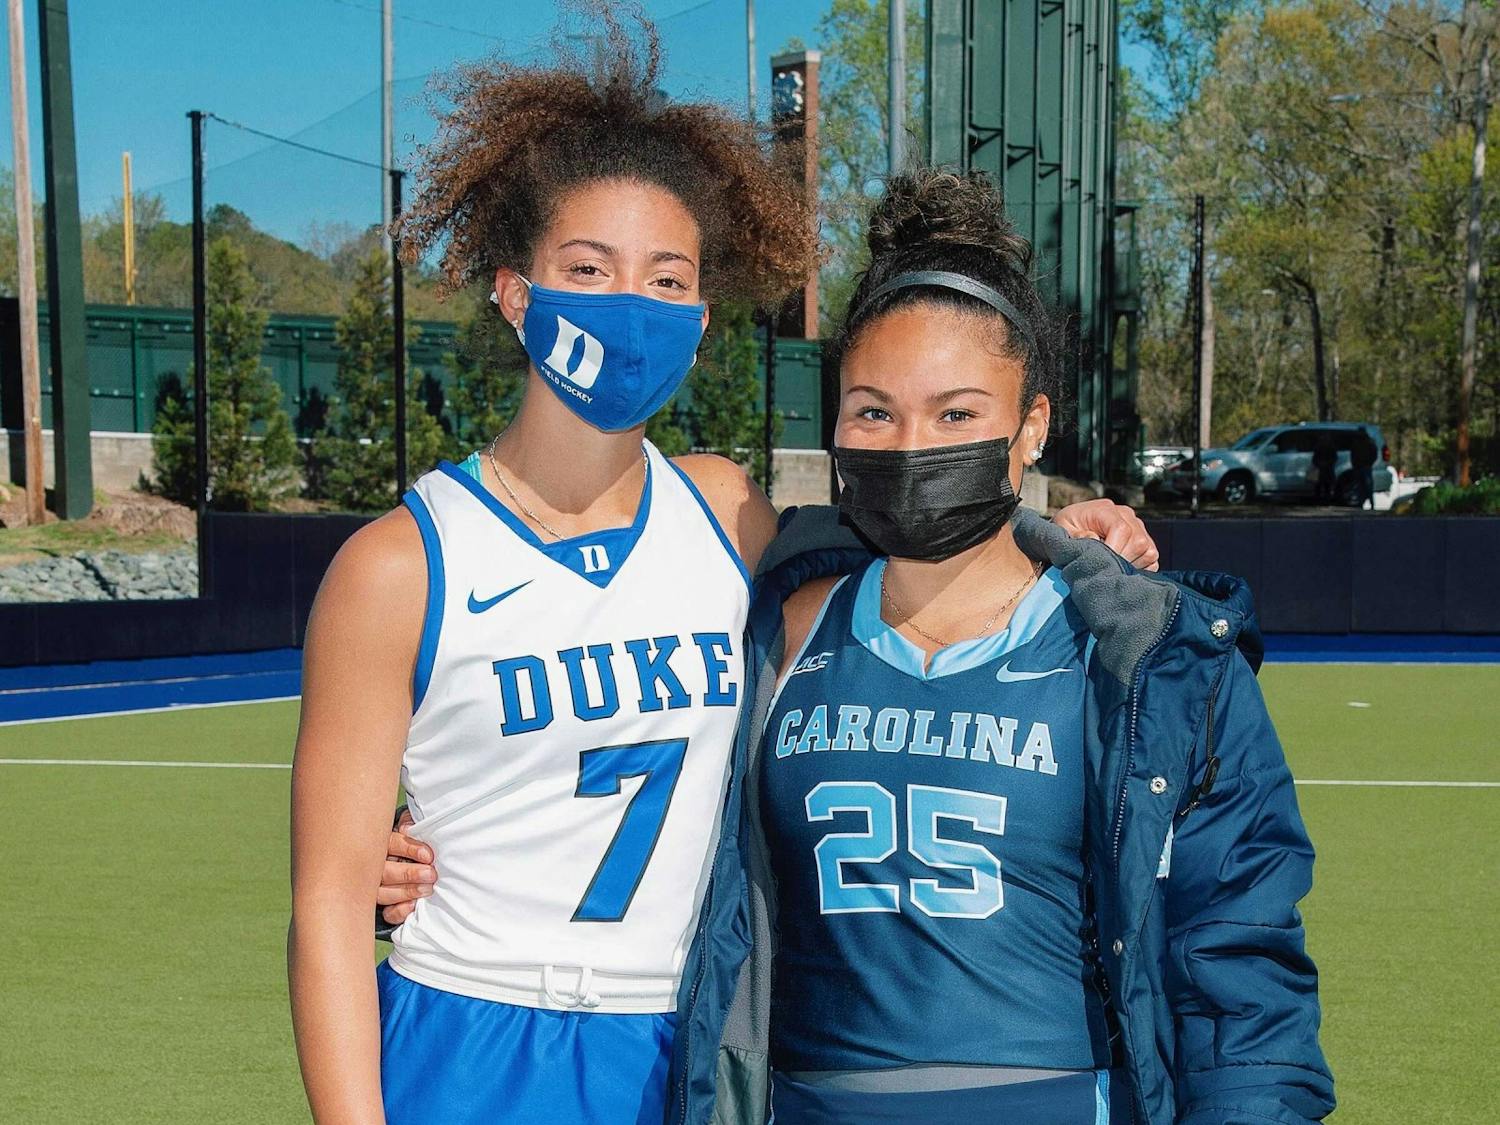 UNC field hockey player Courtnie Williamson (right) and Duke field hockey player Darcy Bourne (left) founded "Beyond Our Game" in February 2021 to help minority athletes in creating careers after college. Photo courtesy of Courtnie Williamson.